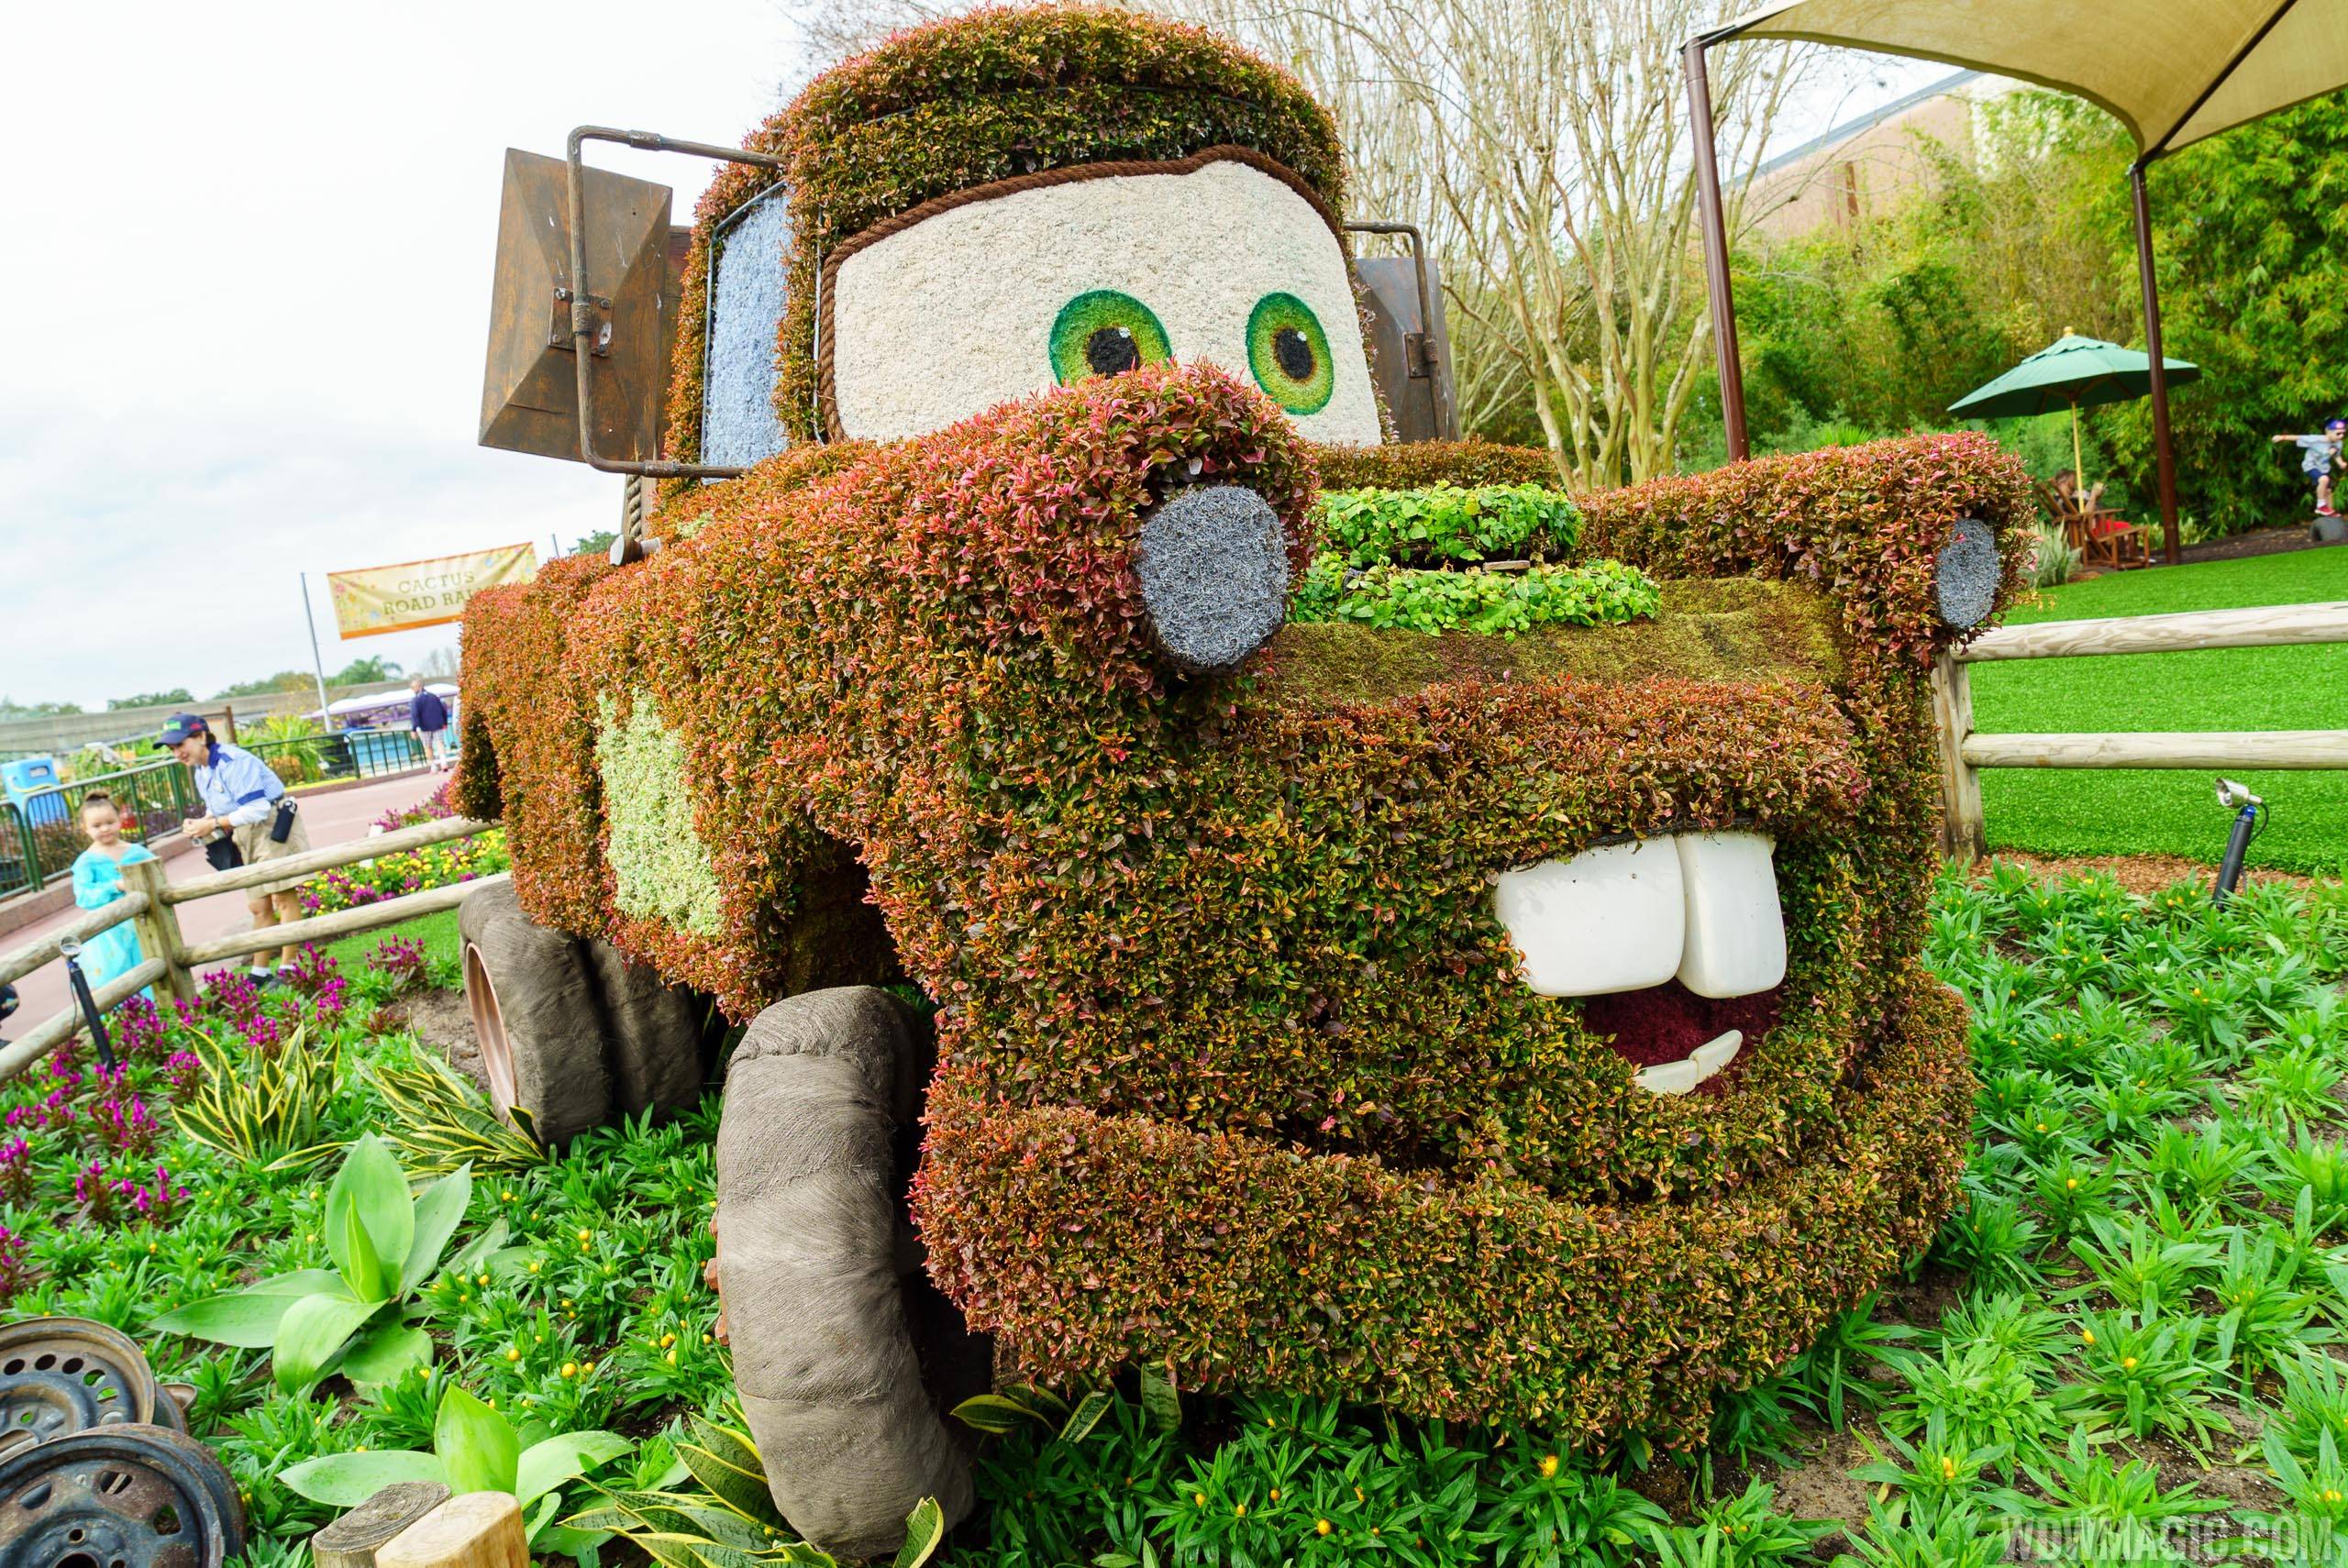 2016 Epcot International Flower and Garden Festival - Tow Mater topiary